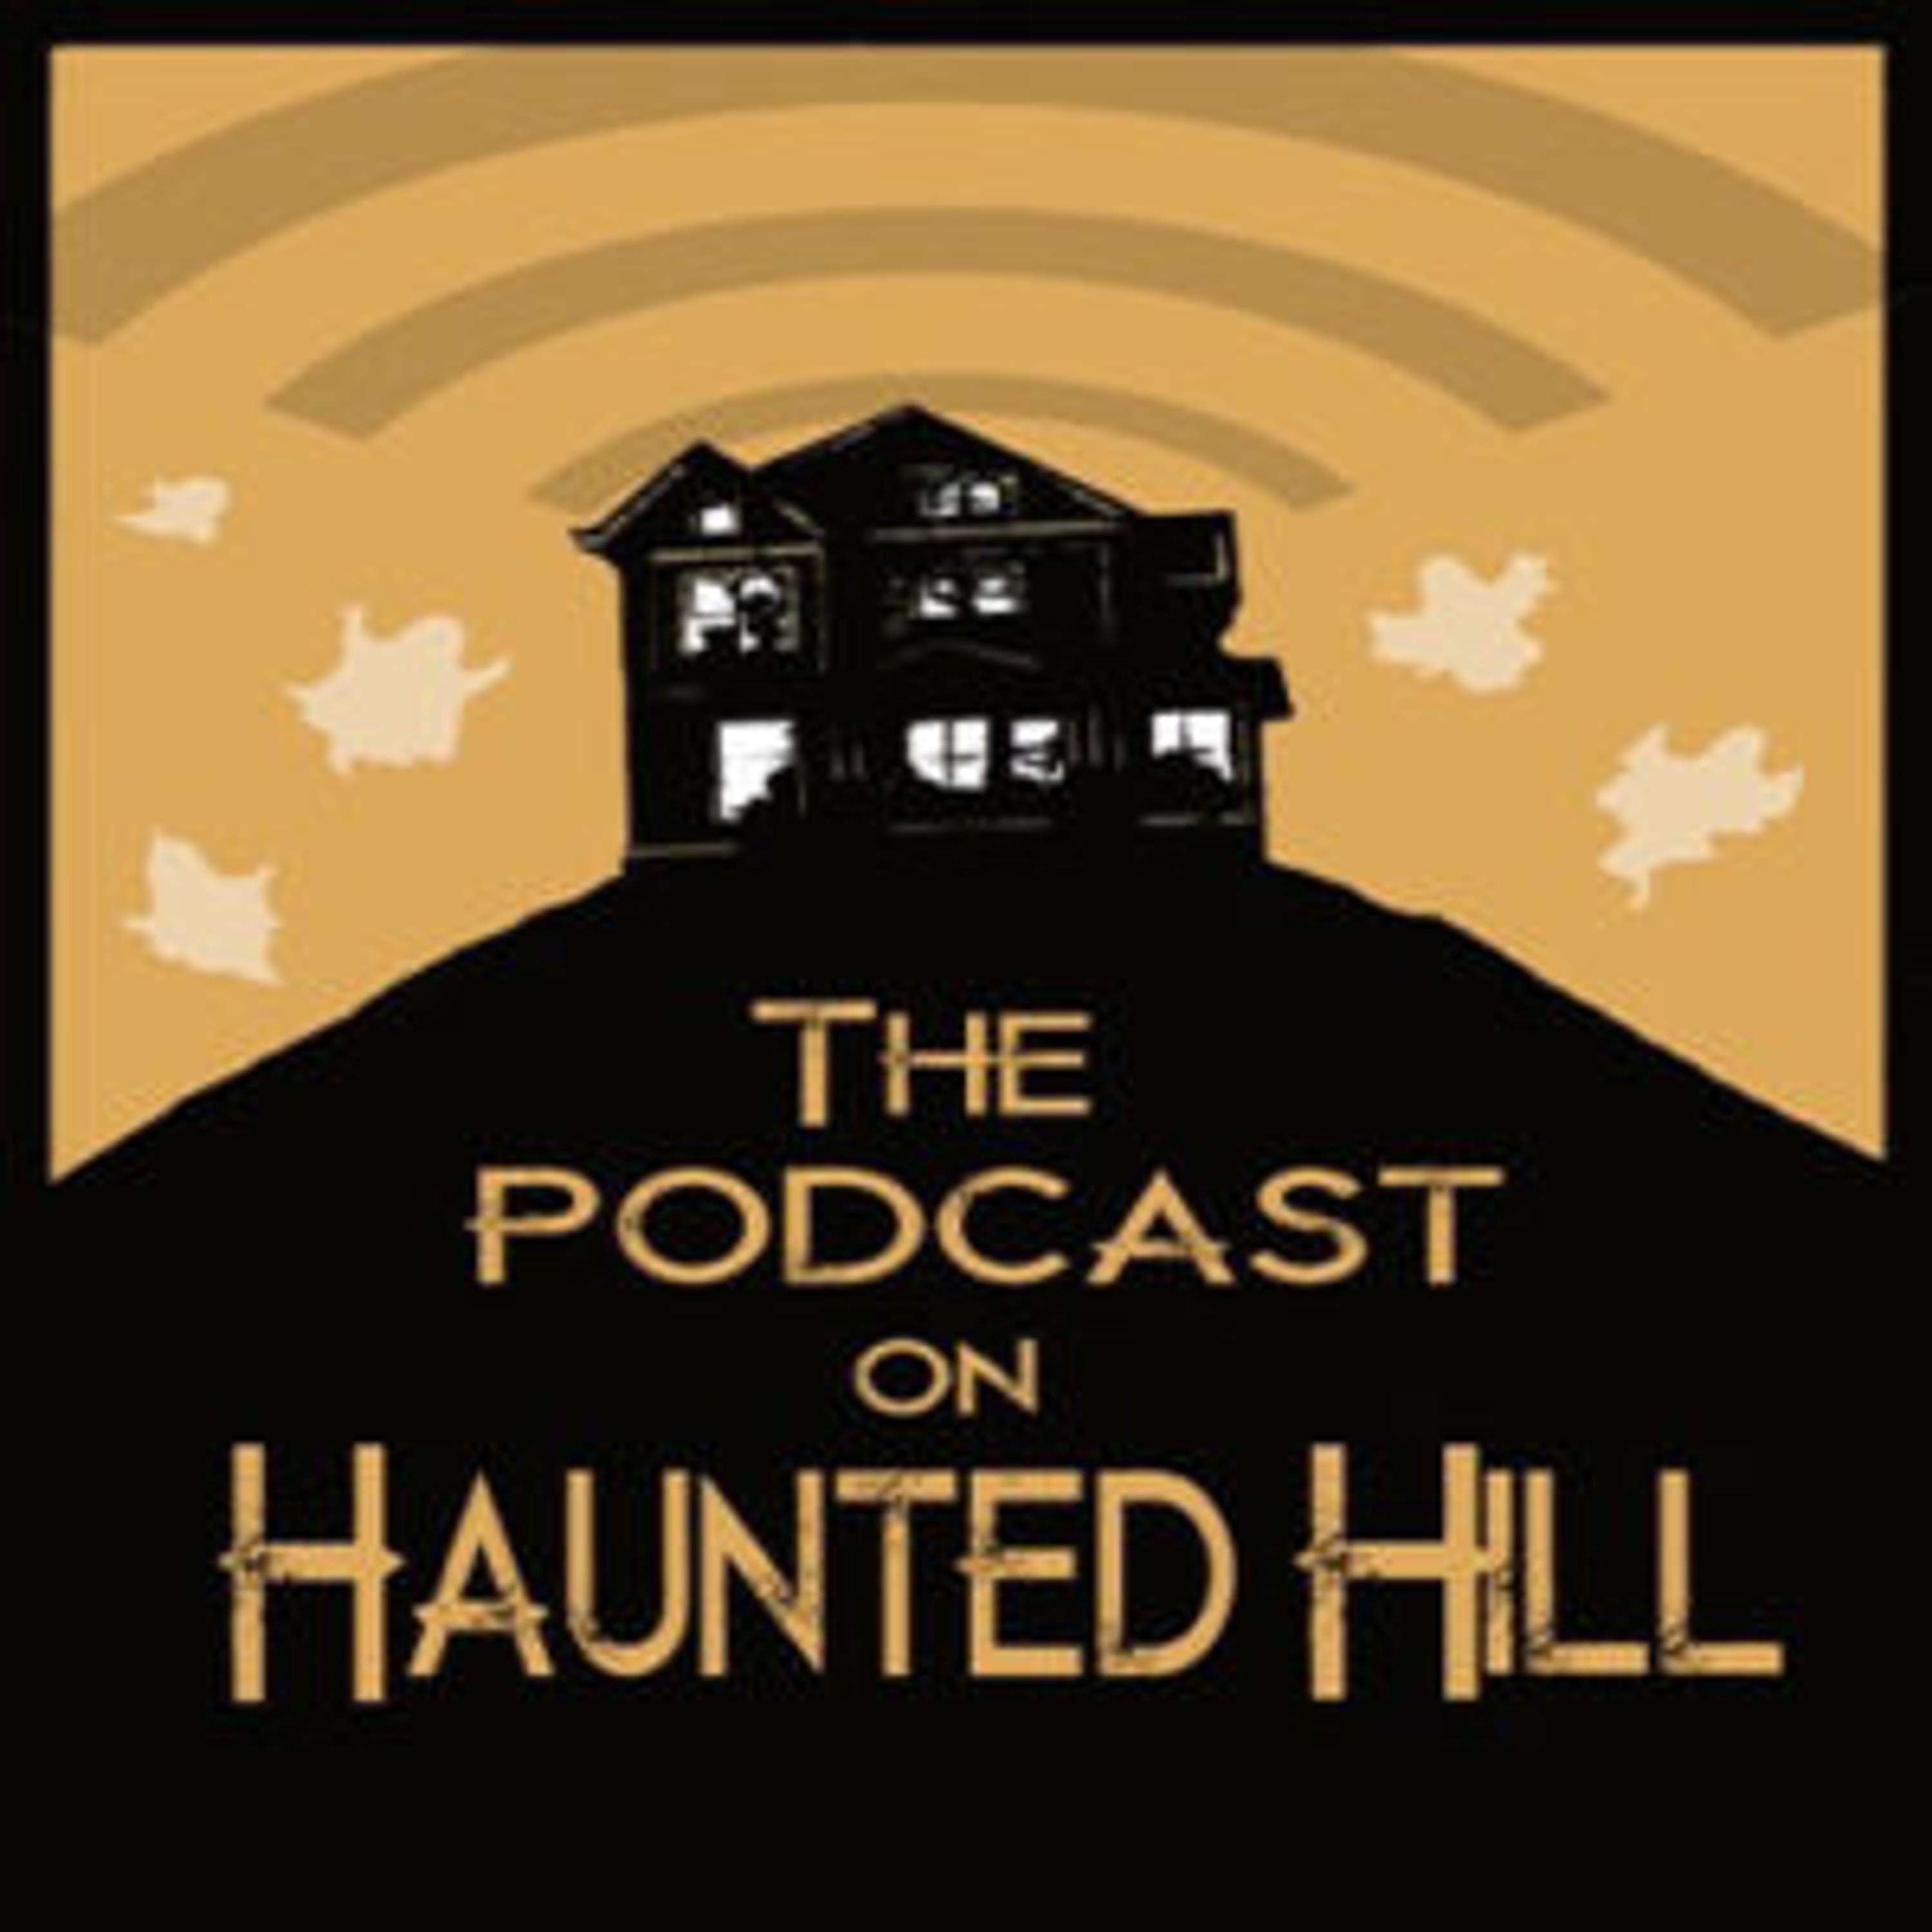 THE PODCAST ON HAUNTED HILL EPISODE 63 – THE HOST AND TRAIN TO BUSAN